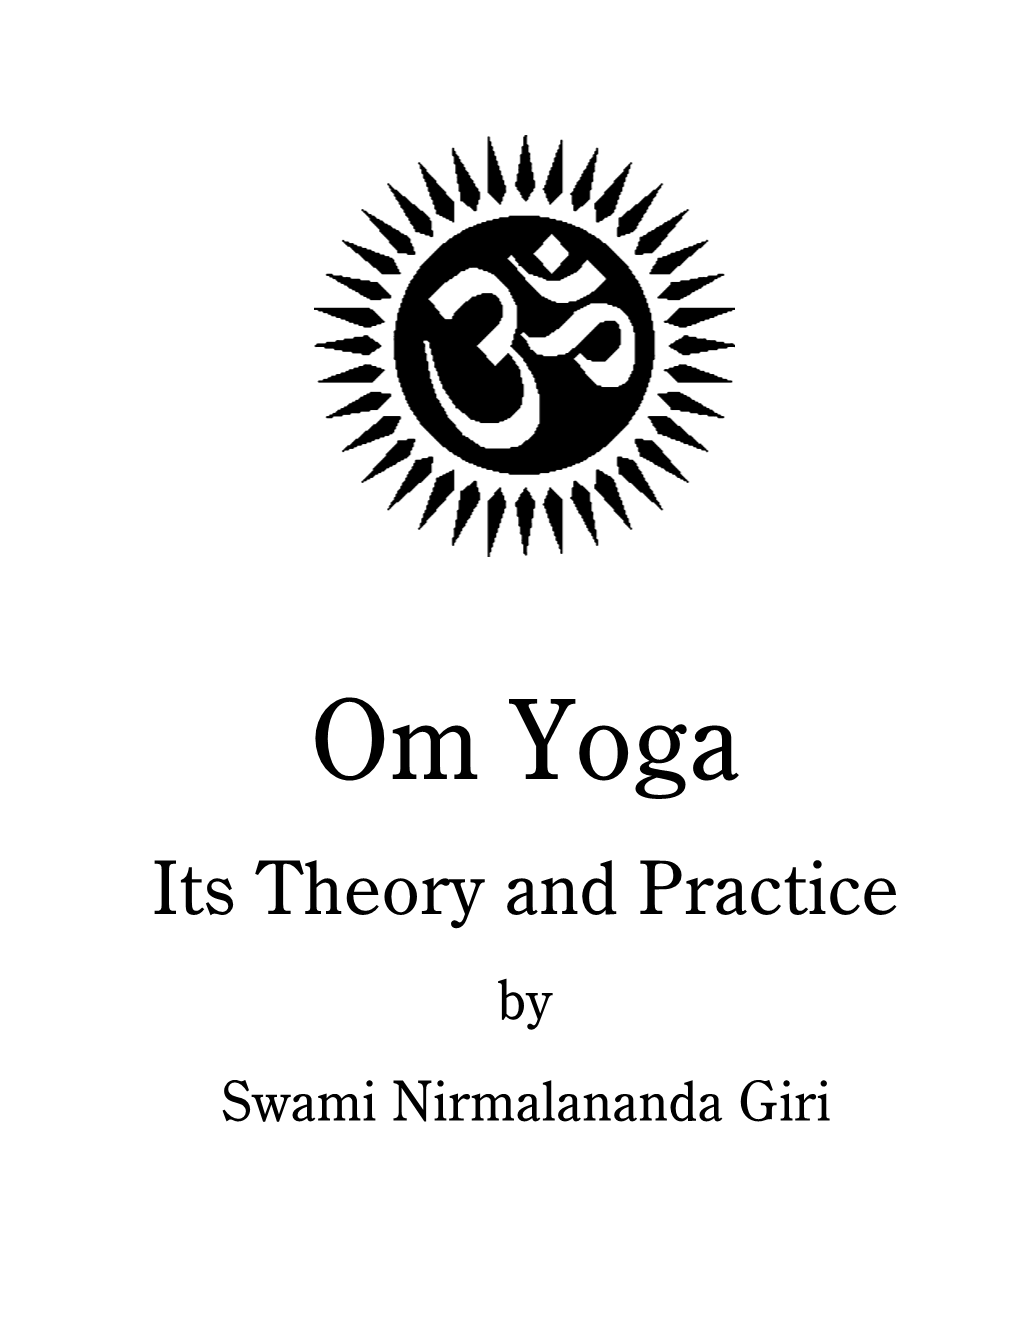 Om Yoga Its Theory and Practice by Swami Nirmalananda Giri ©Copyright 2006 by Atma Jyoti Press Contents